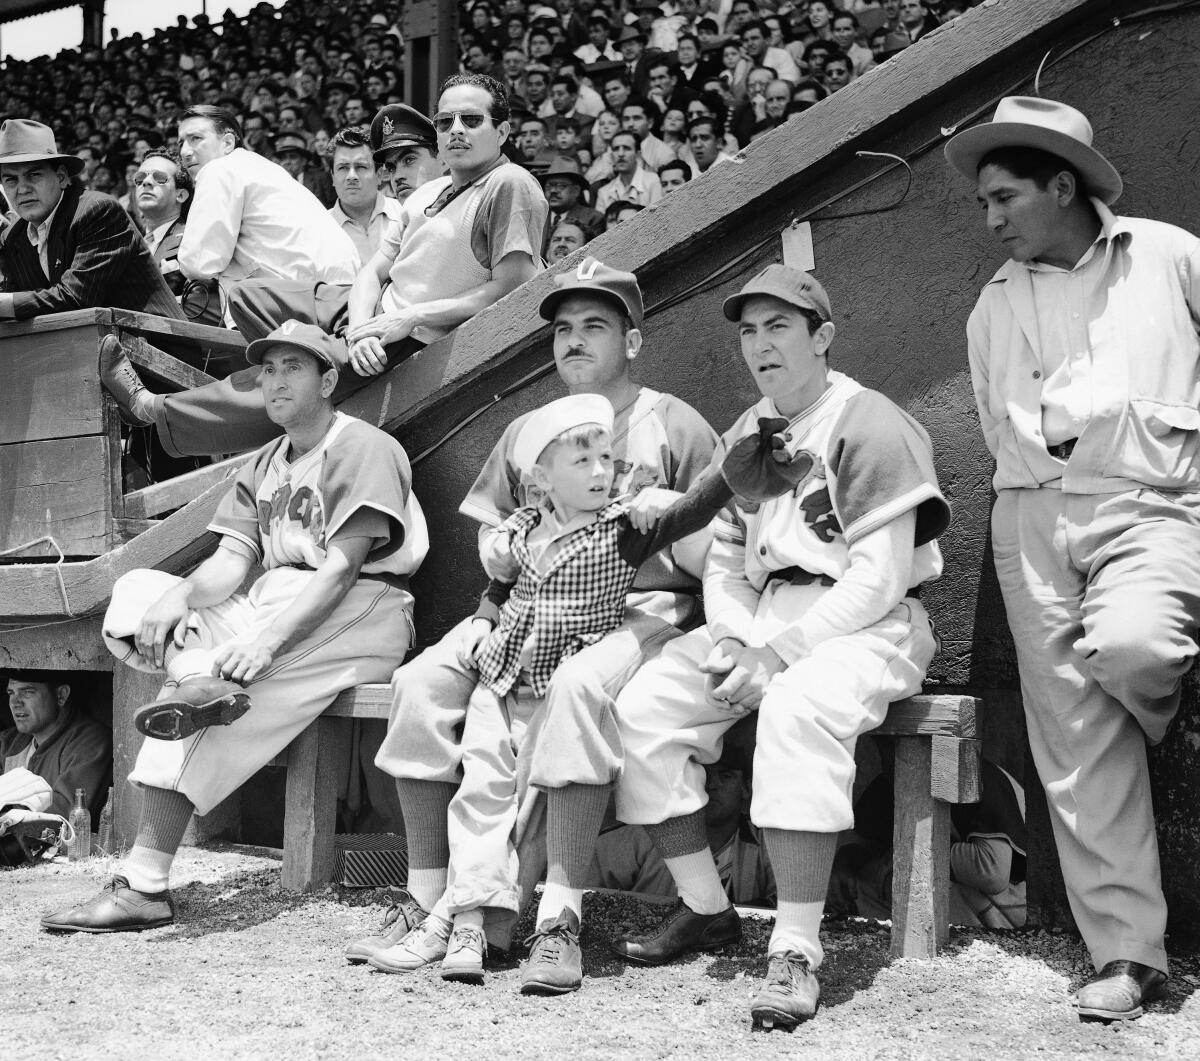 Jorge Pasquel, president of the Mexican Baseball League, is shown (center) in uniform on the bench of his Veracruz team.